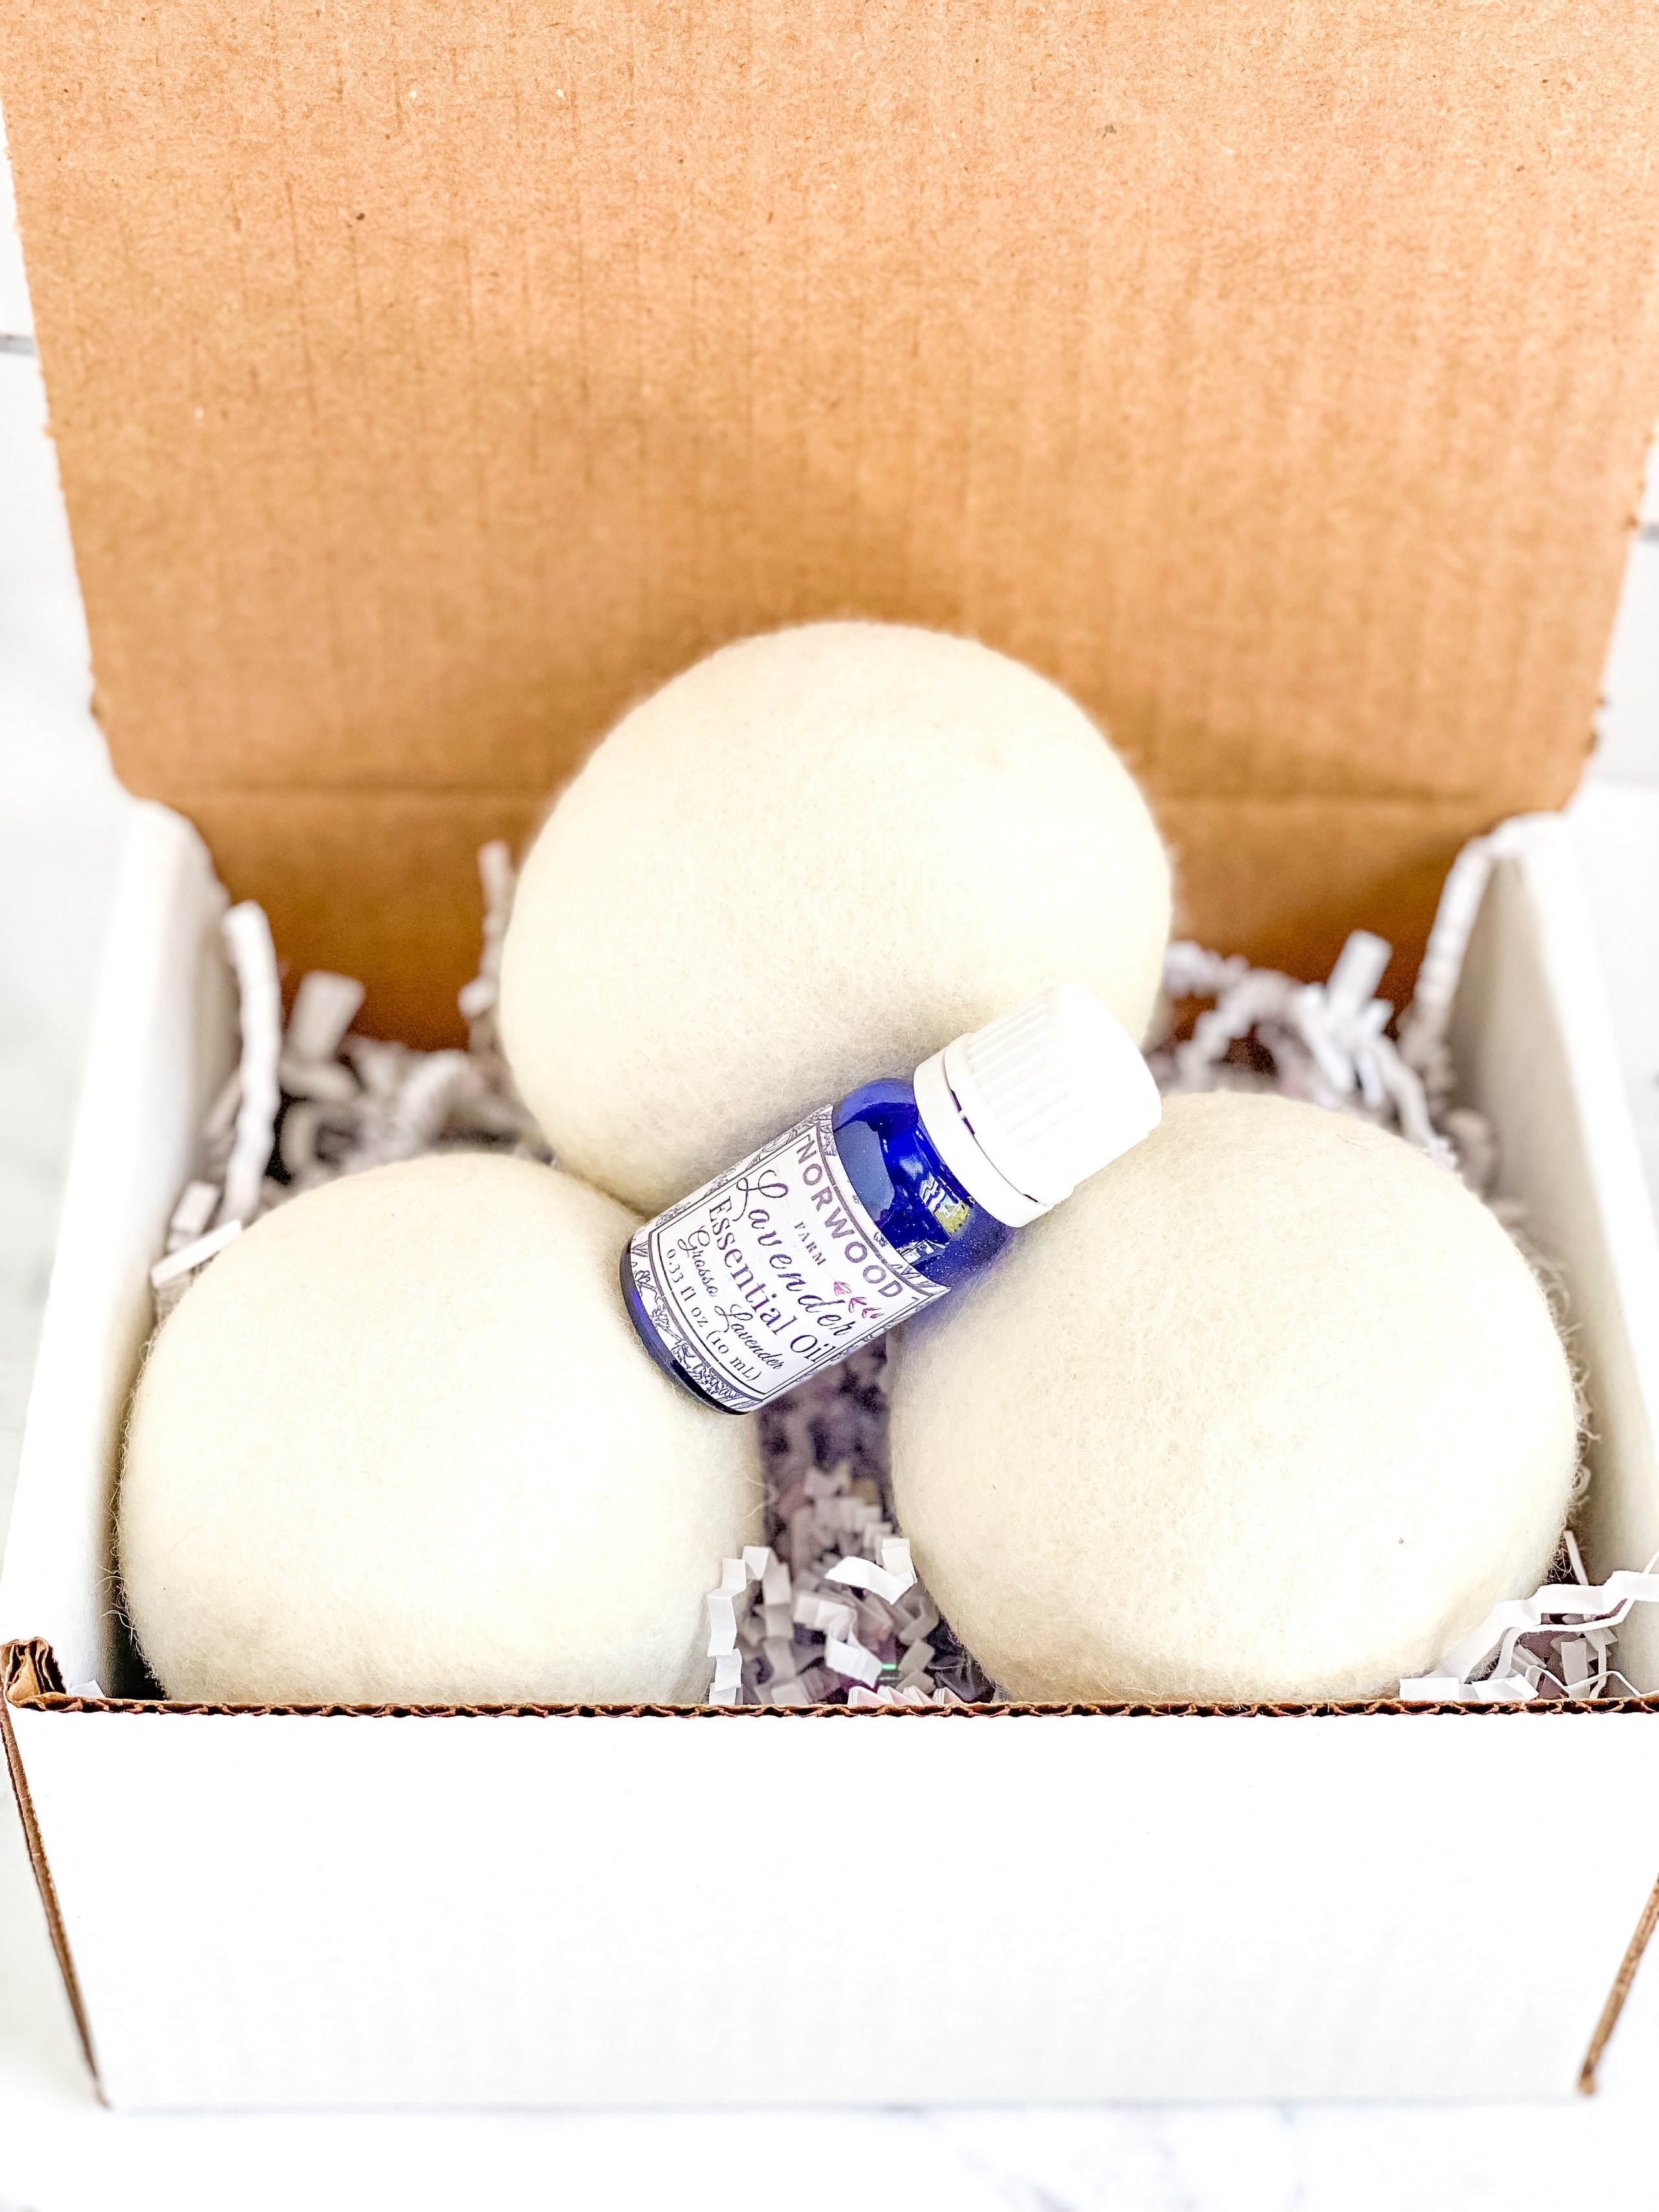 Mountclear Wool Dryer Balls-Lavender Scented Oil Fabric Softener